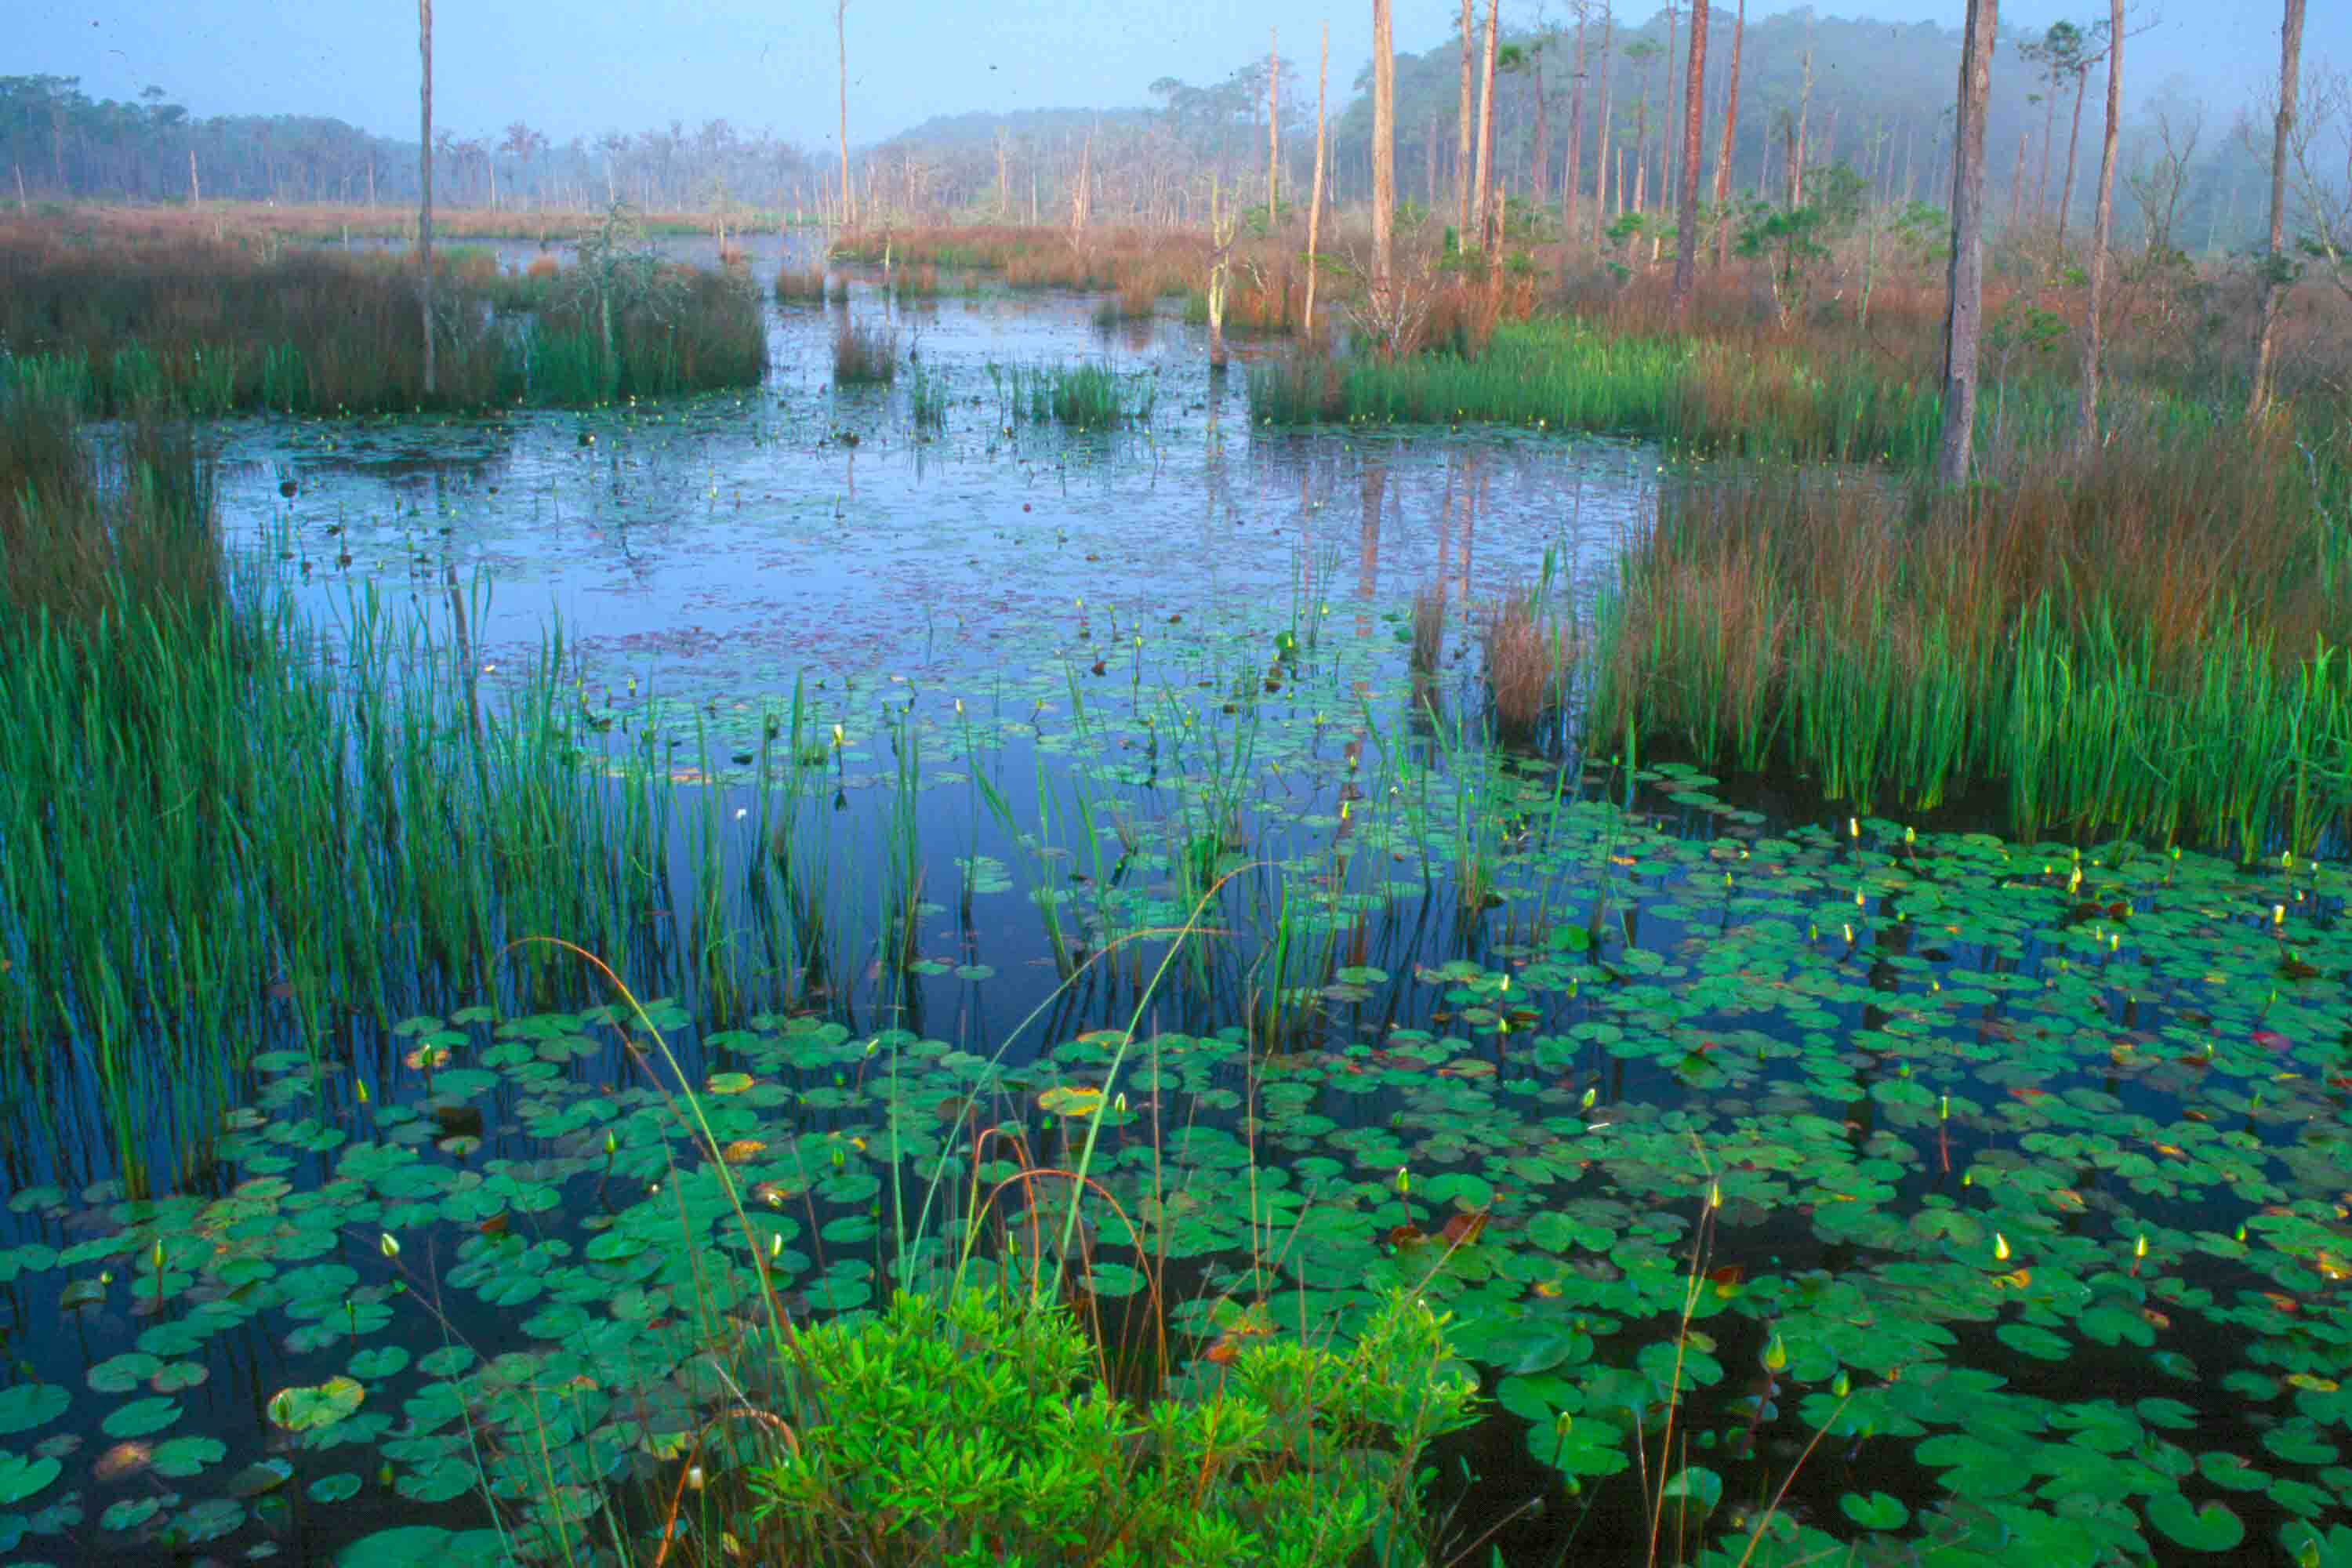 water lilies in open water edged with and marsh grass